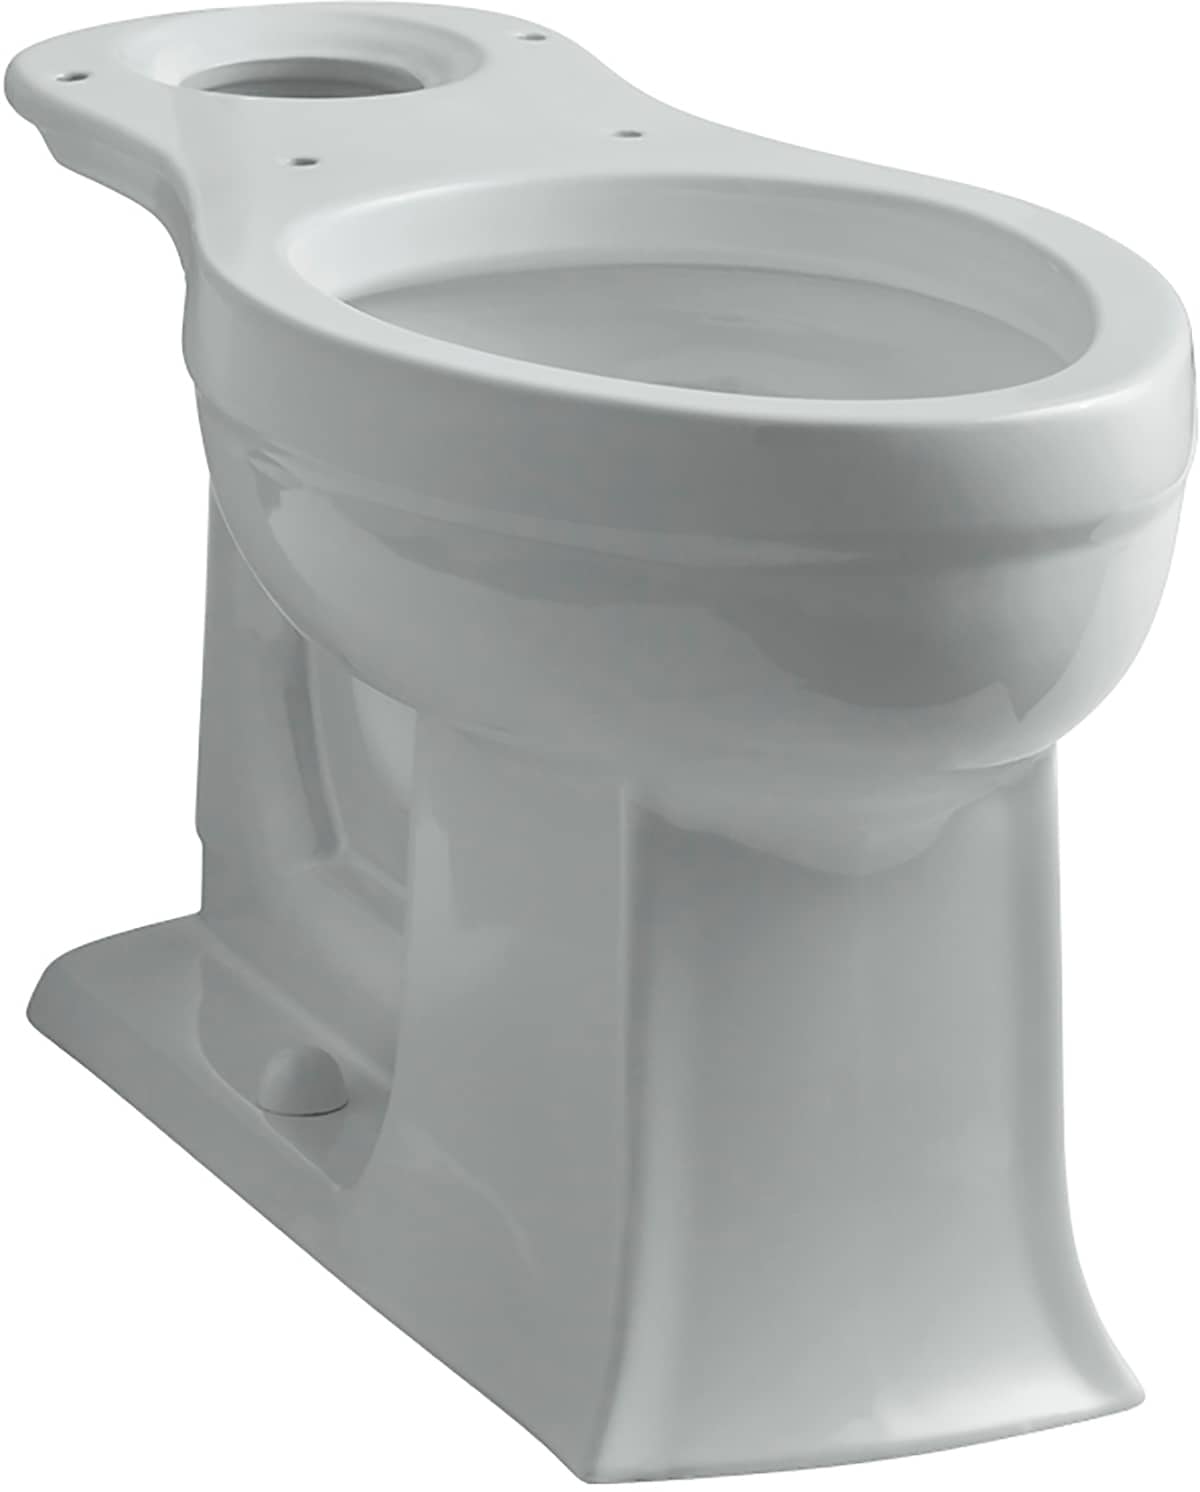 KOHLER Archer Ice Grey Elongated Chair Height Toilet Bowl 12-in Rough ...